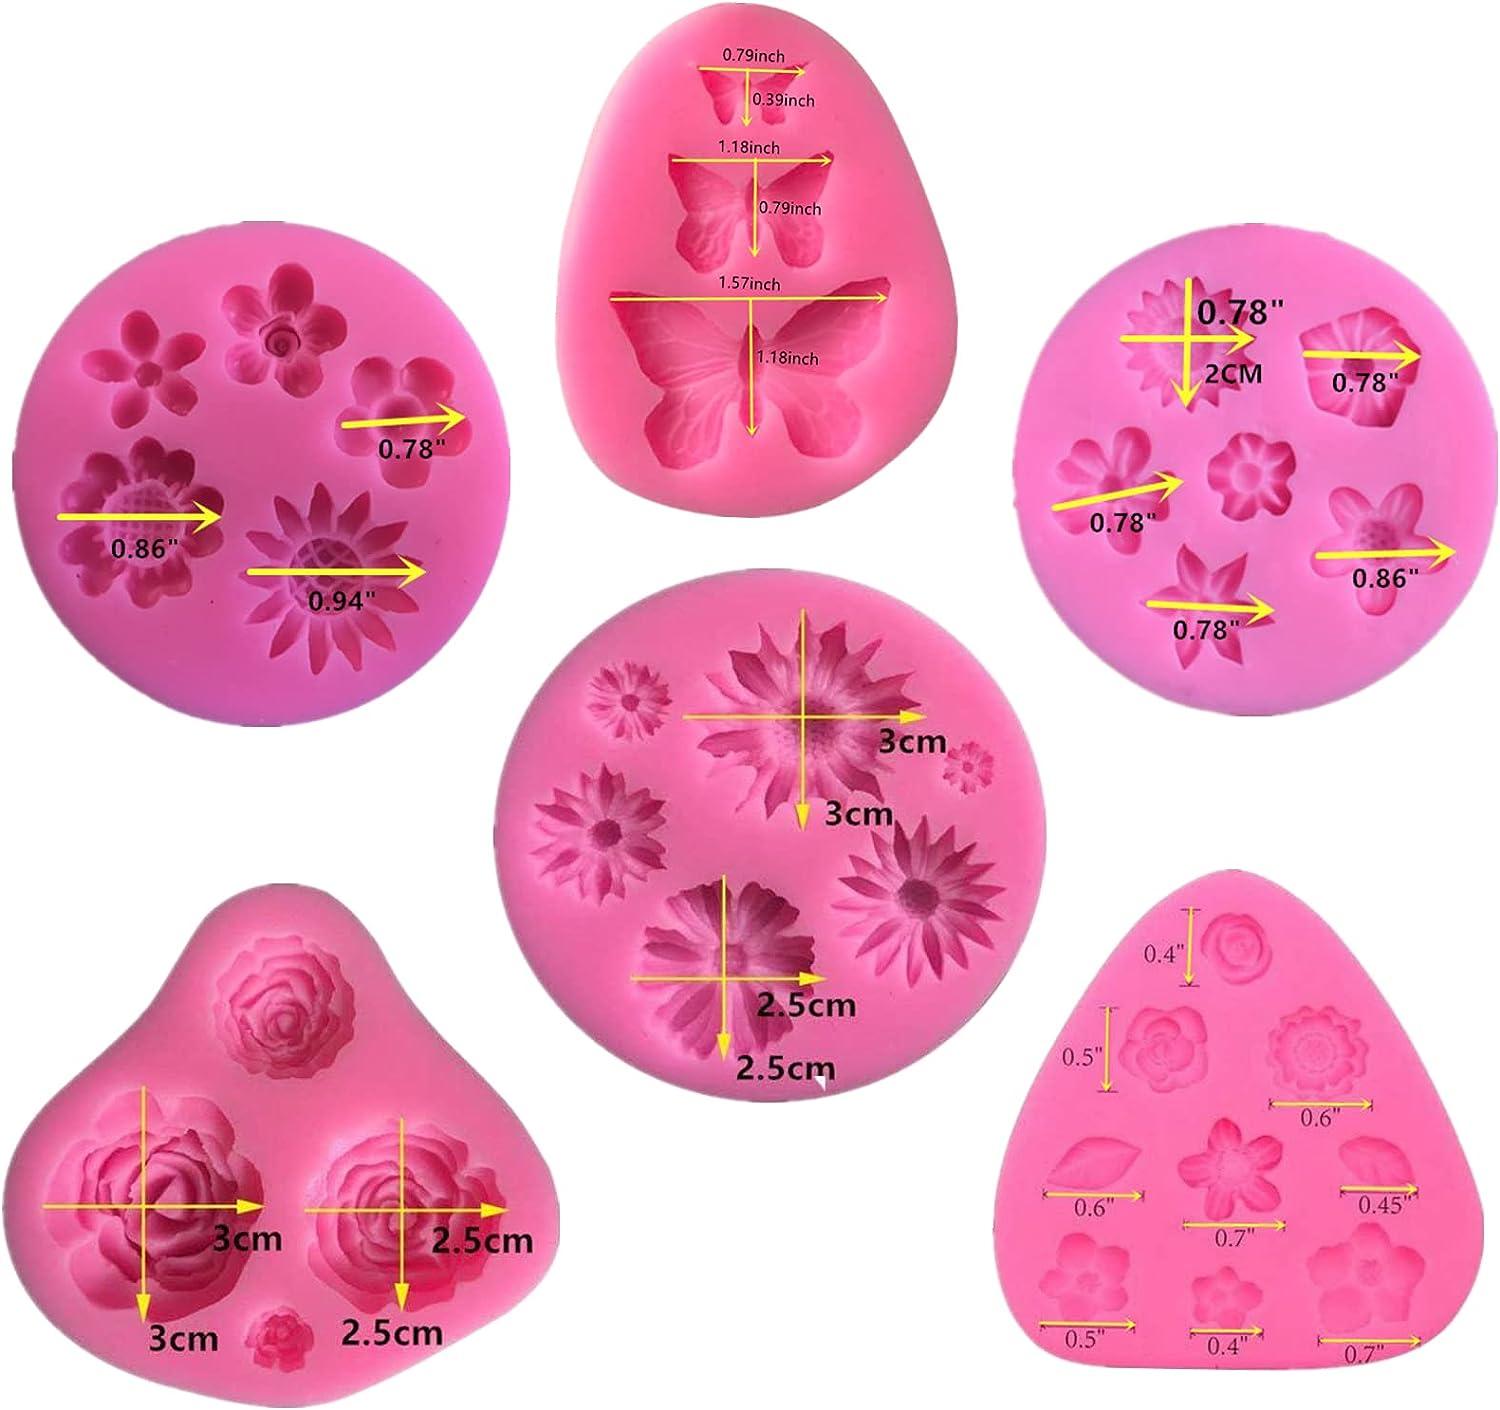 Mini Flower Silicone Mold Mold for Chocolate Mold for Fondant for